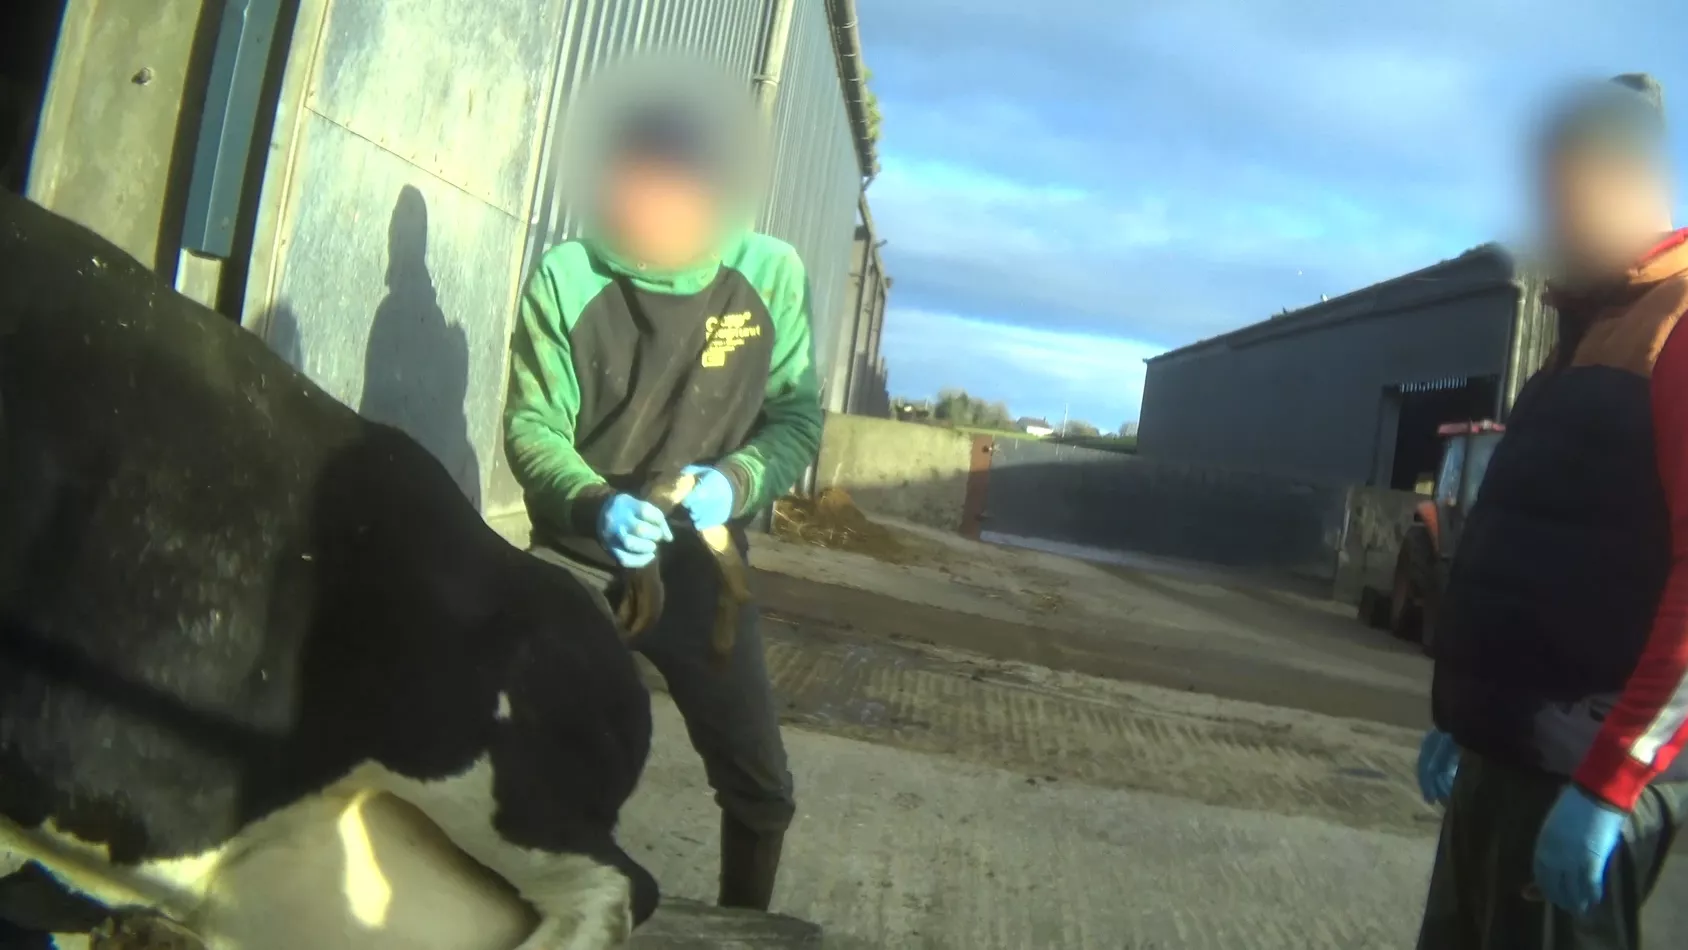 Workers on a UK dairy farm painfully twist the tail of a lame cow moments after she gave birth